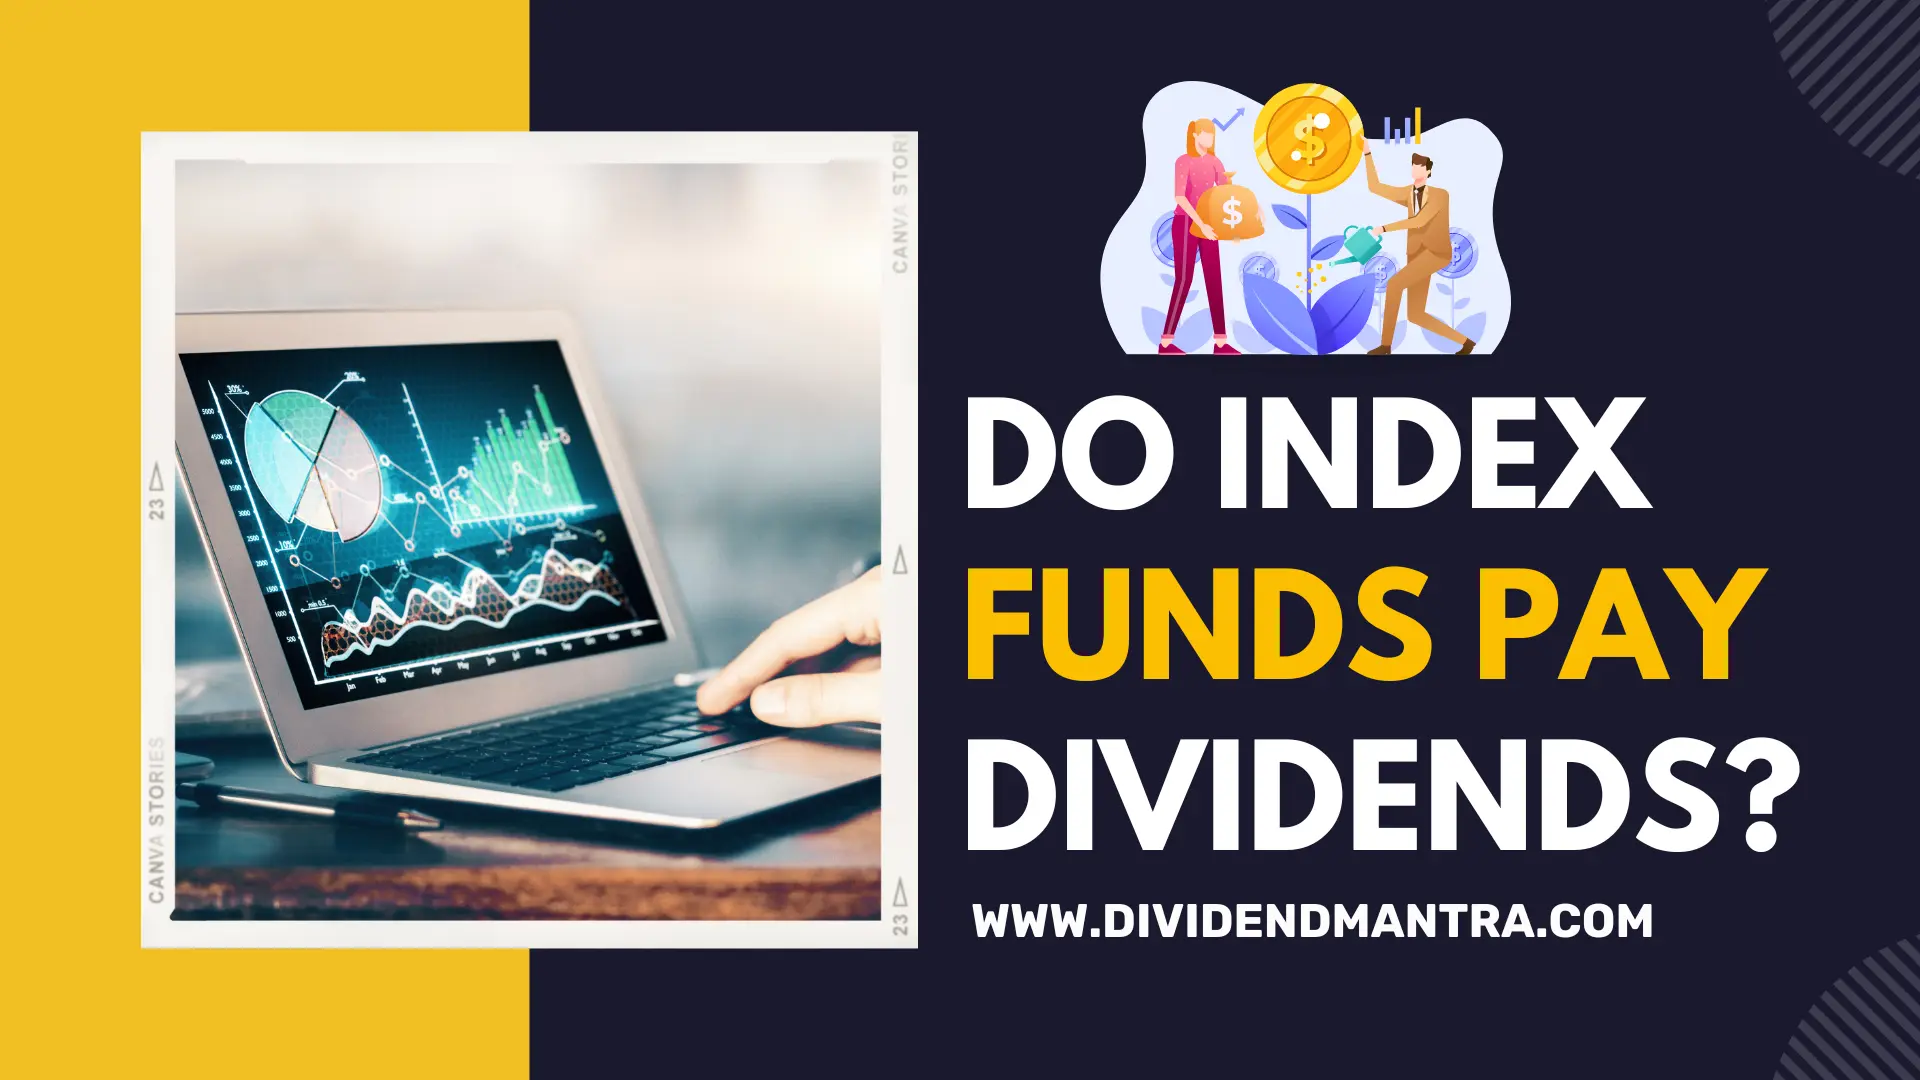 Do Index Funds Pay Dividends